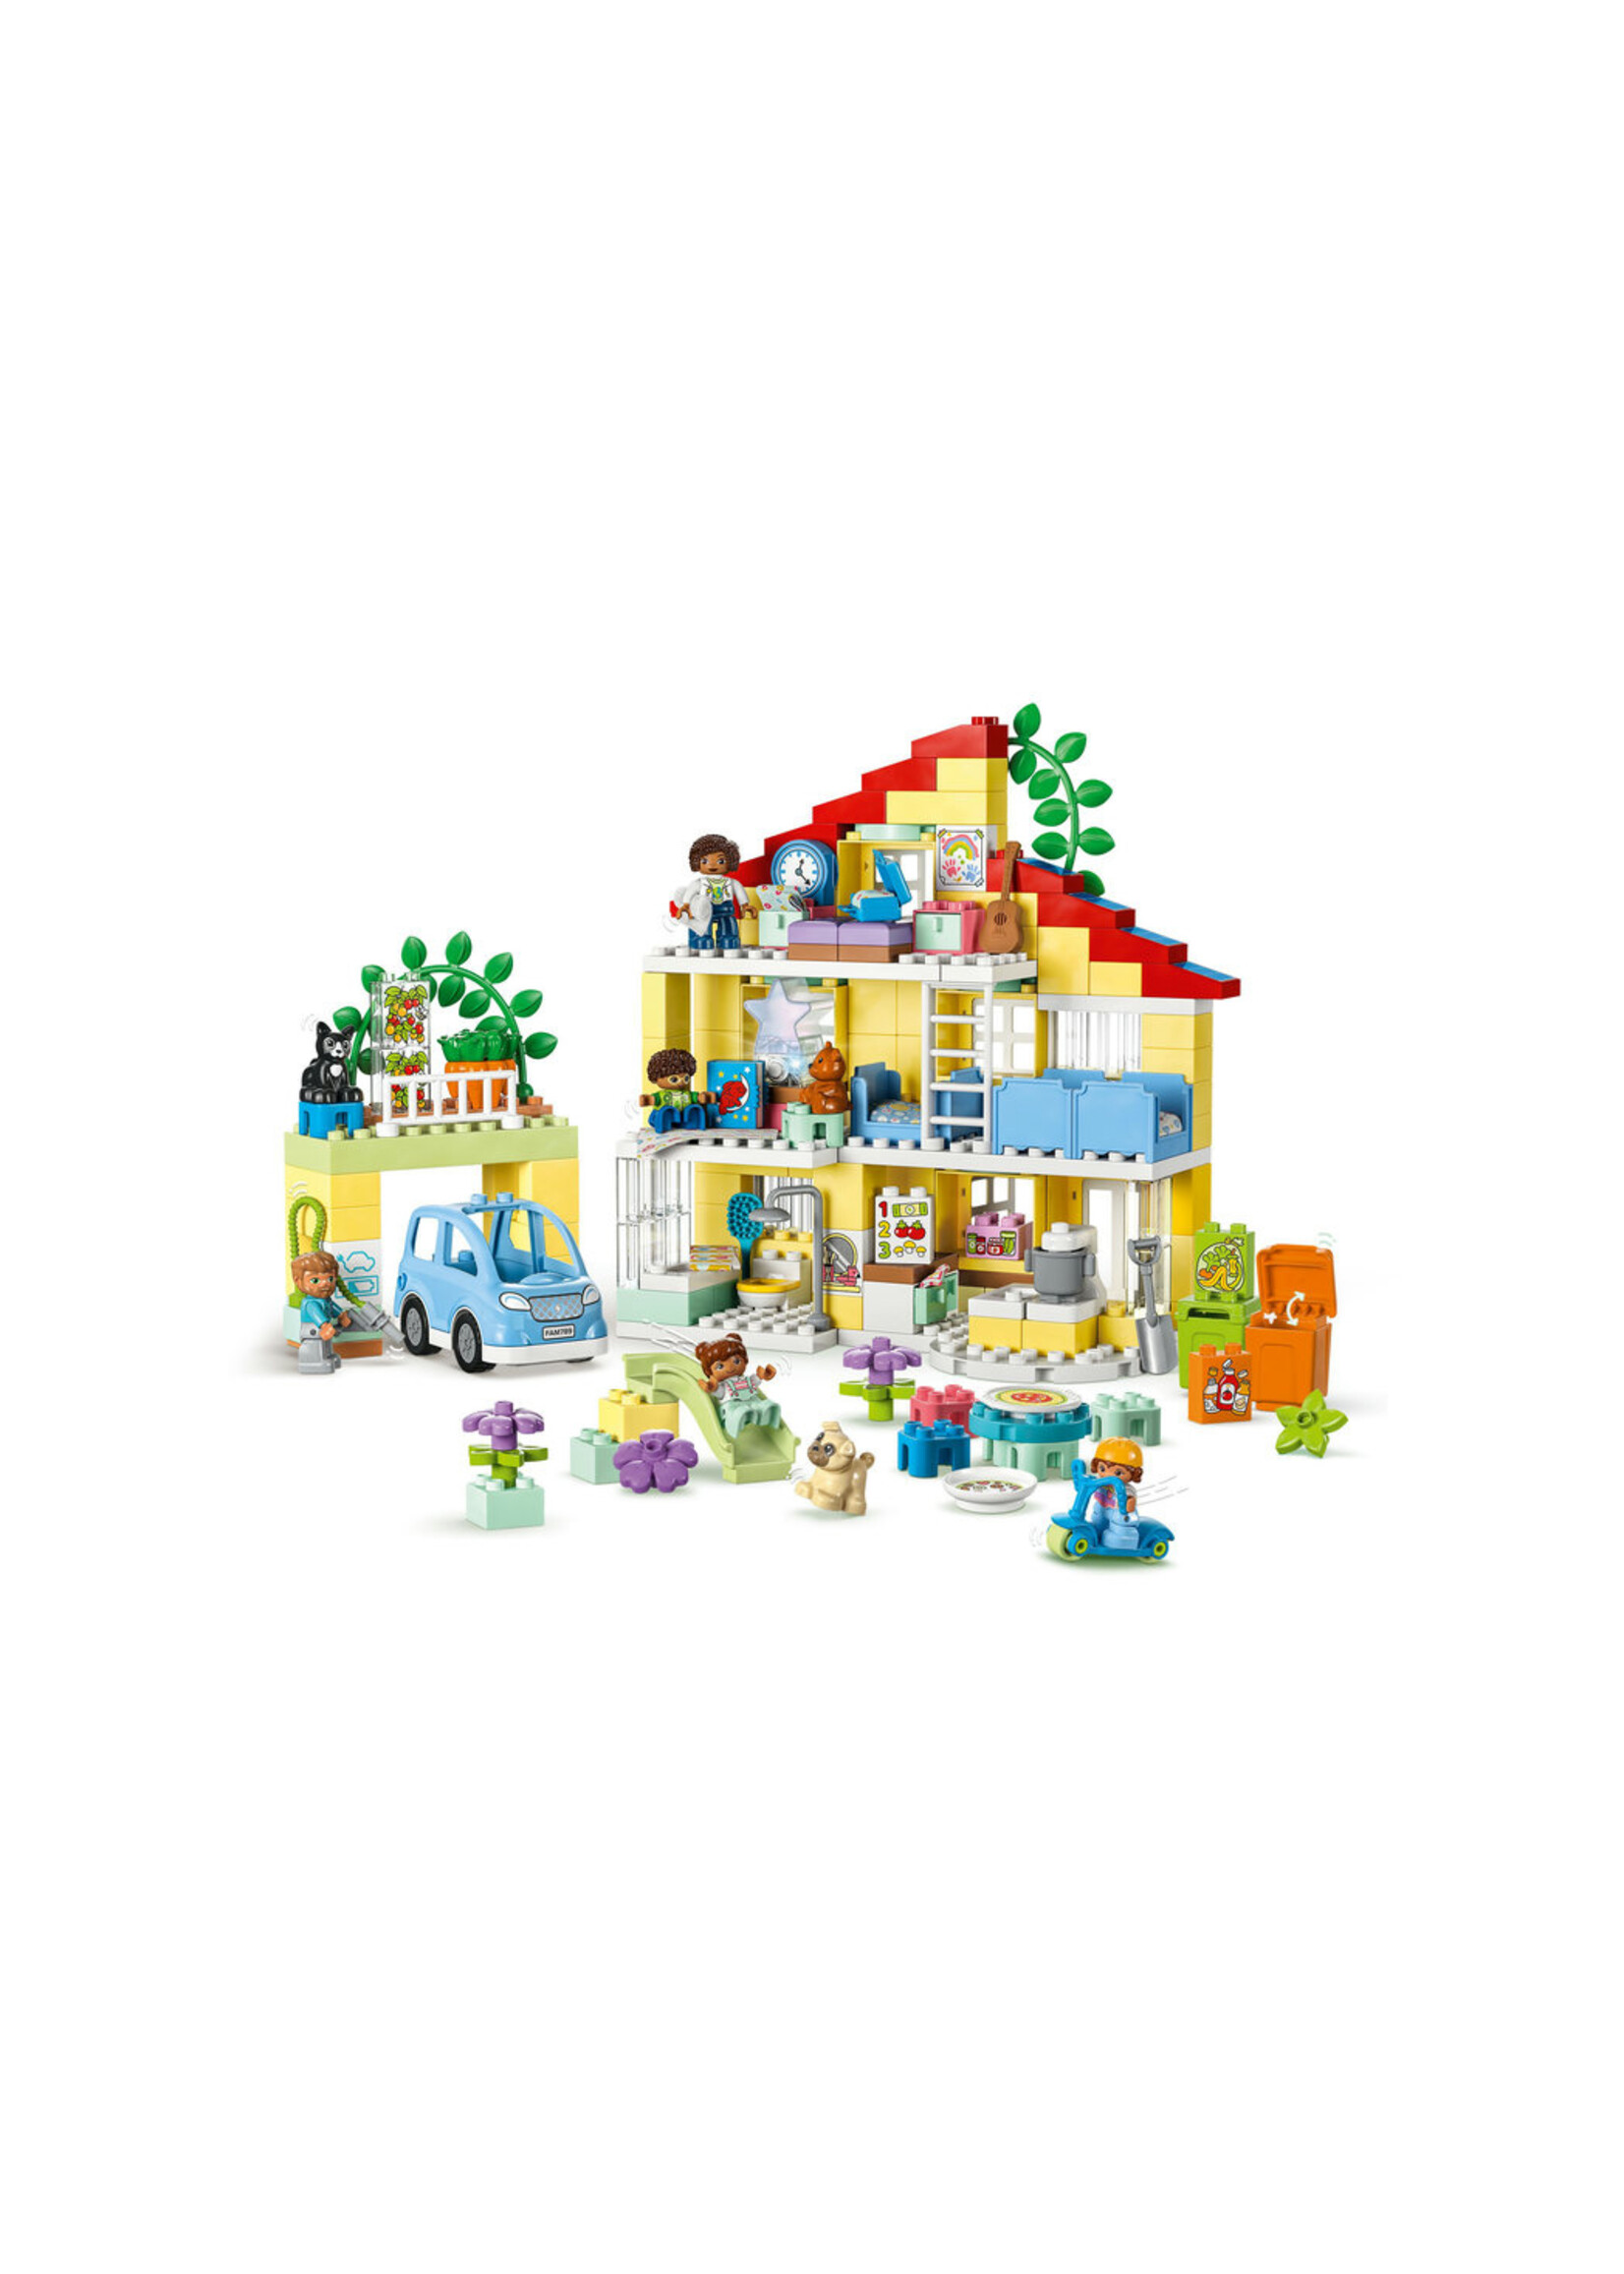 LEGO 10994 - 3 in 1 Family House